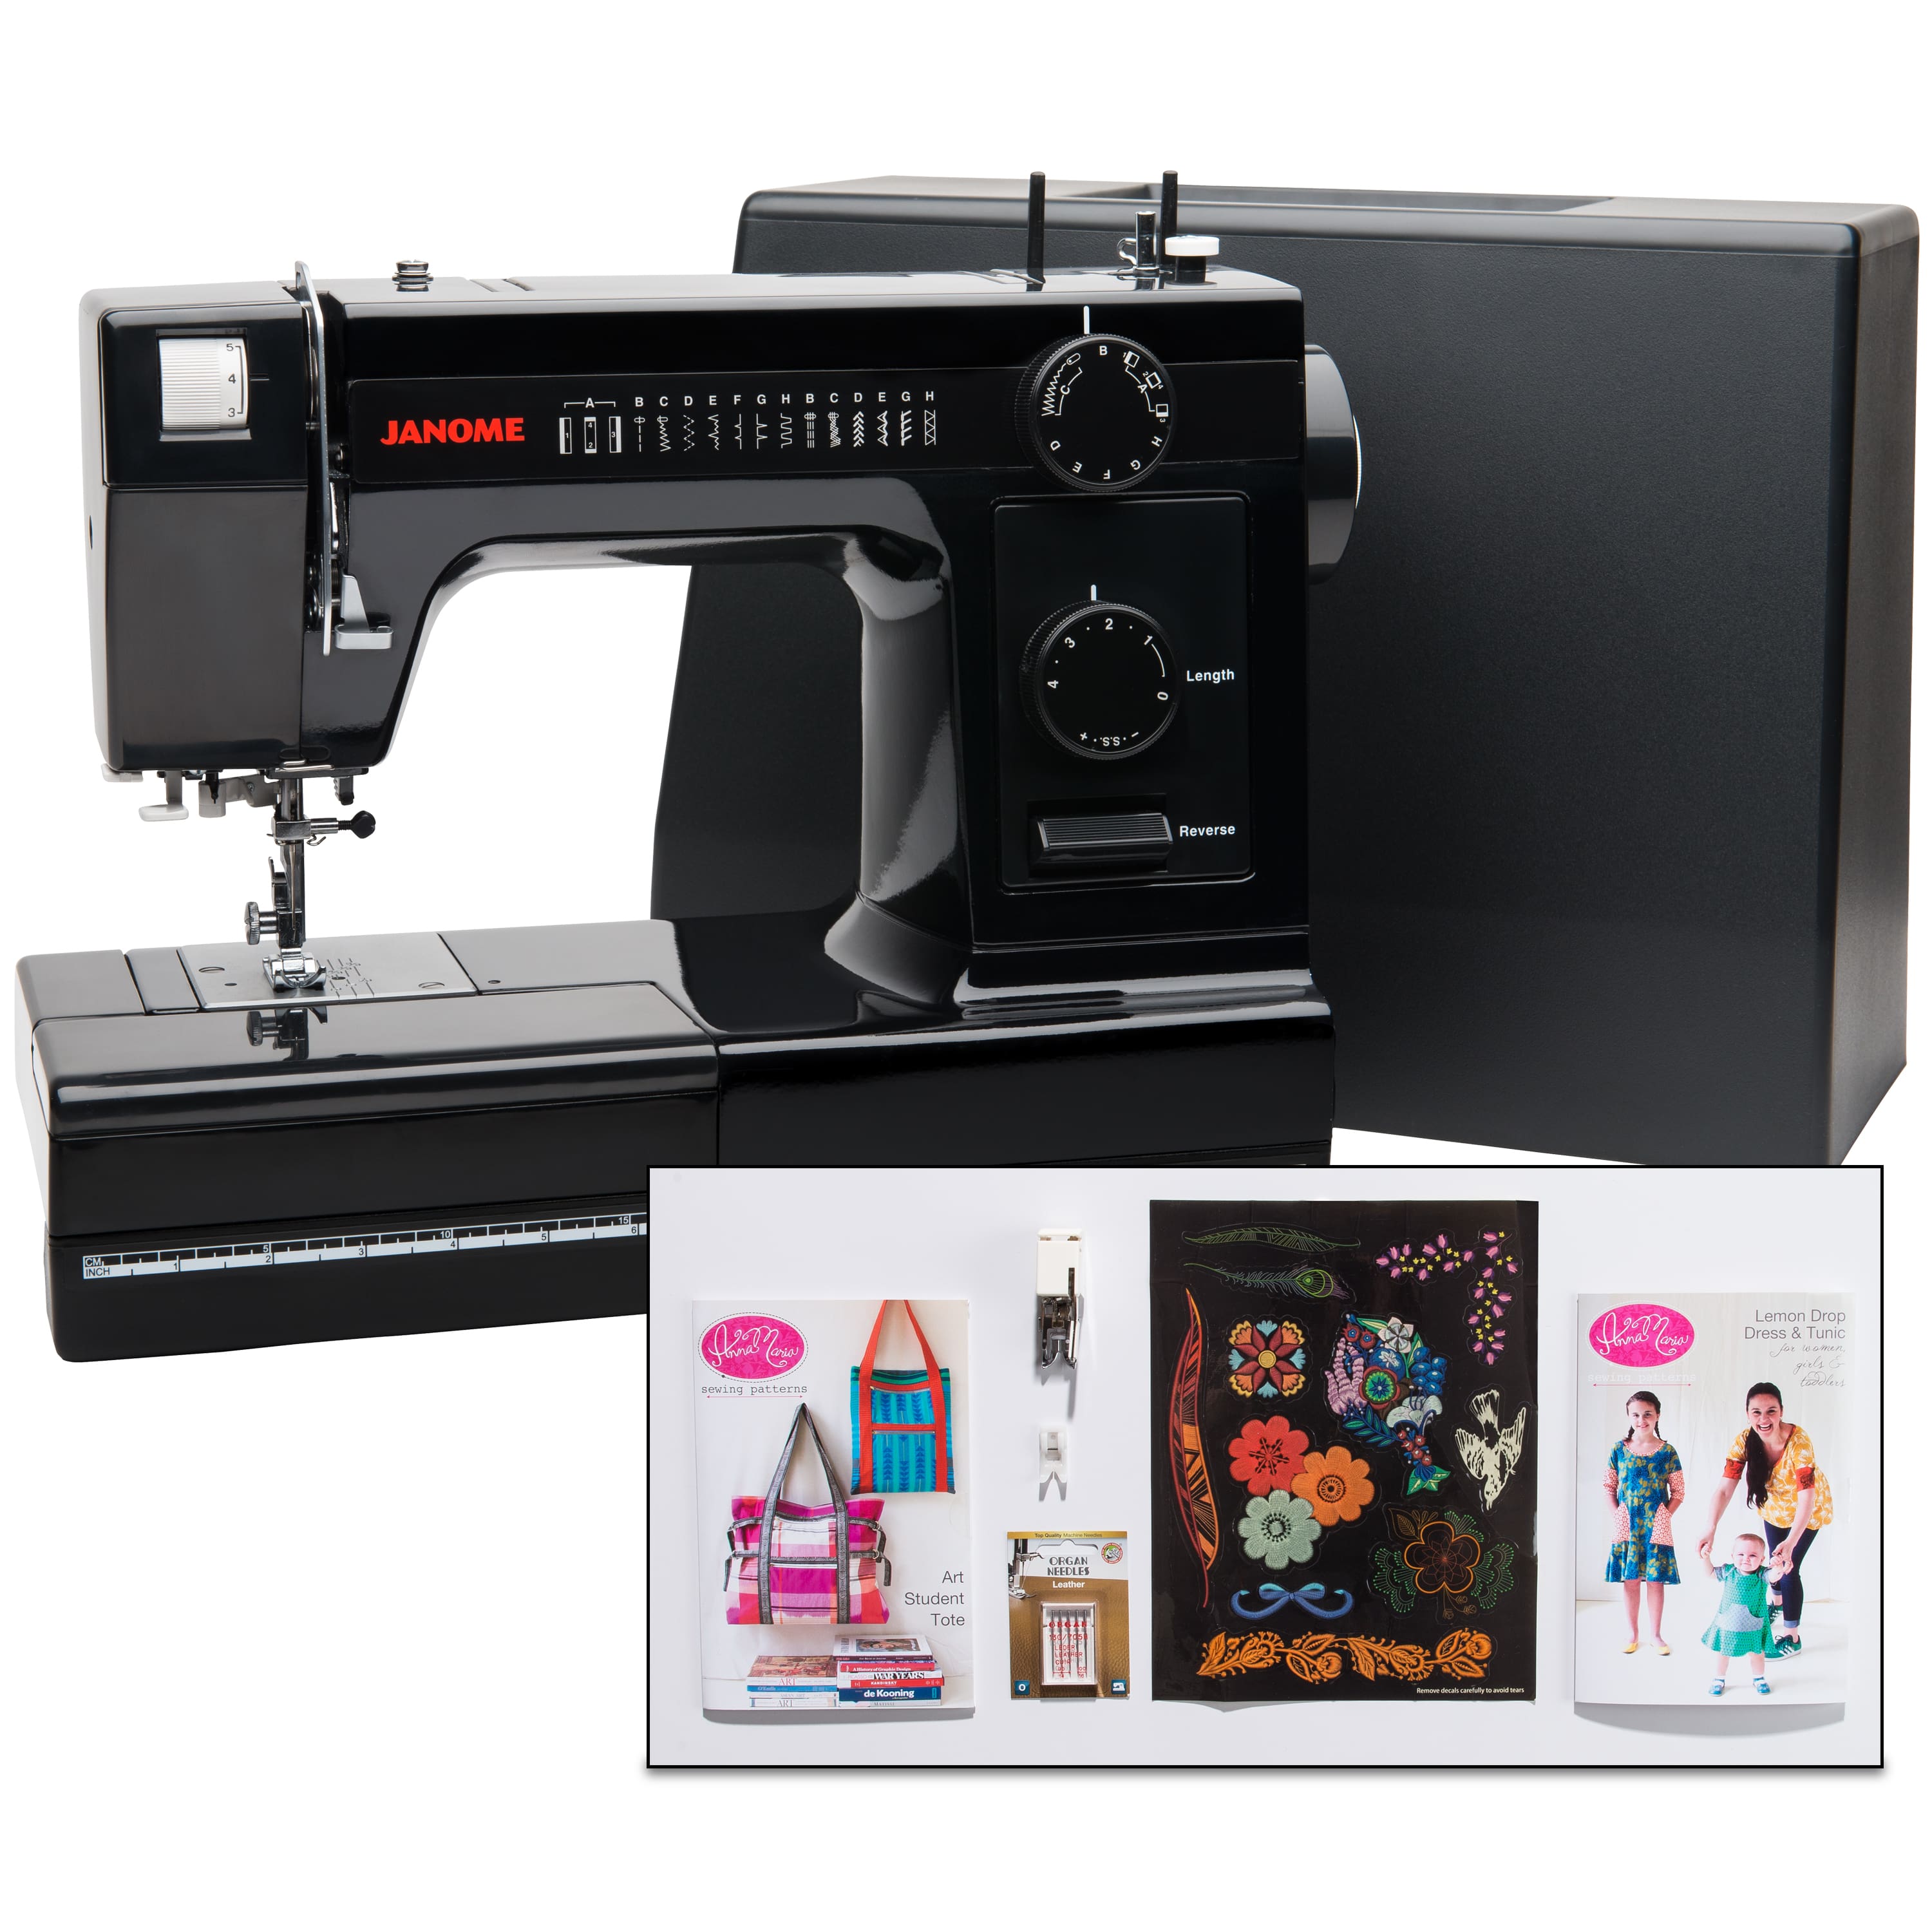 Janome HD1000 Black Edition Industrial-Grade Sewing Machine